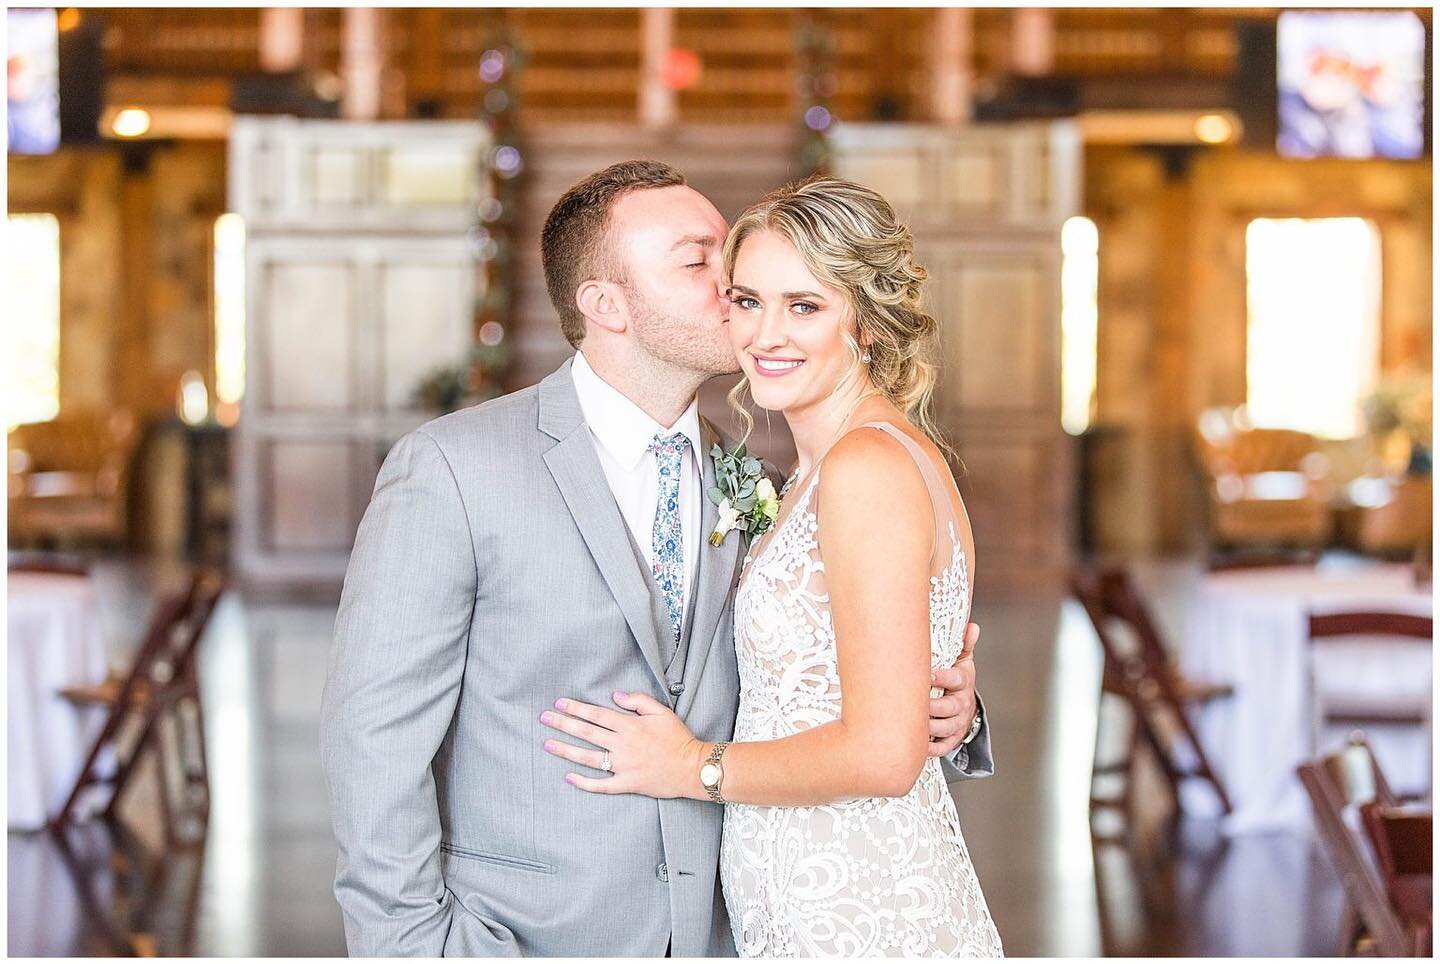 This beautiful couple is featured on @square8studio blog today!
.
.
Venue: @springsvenue